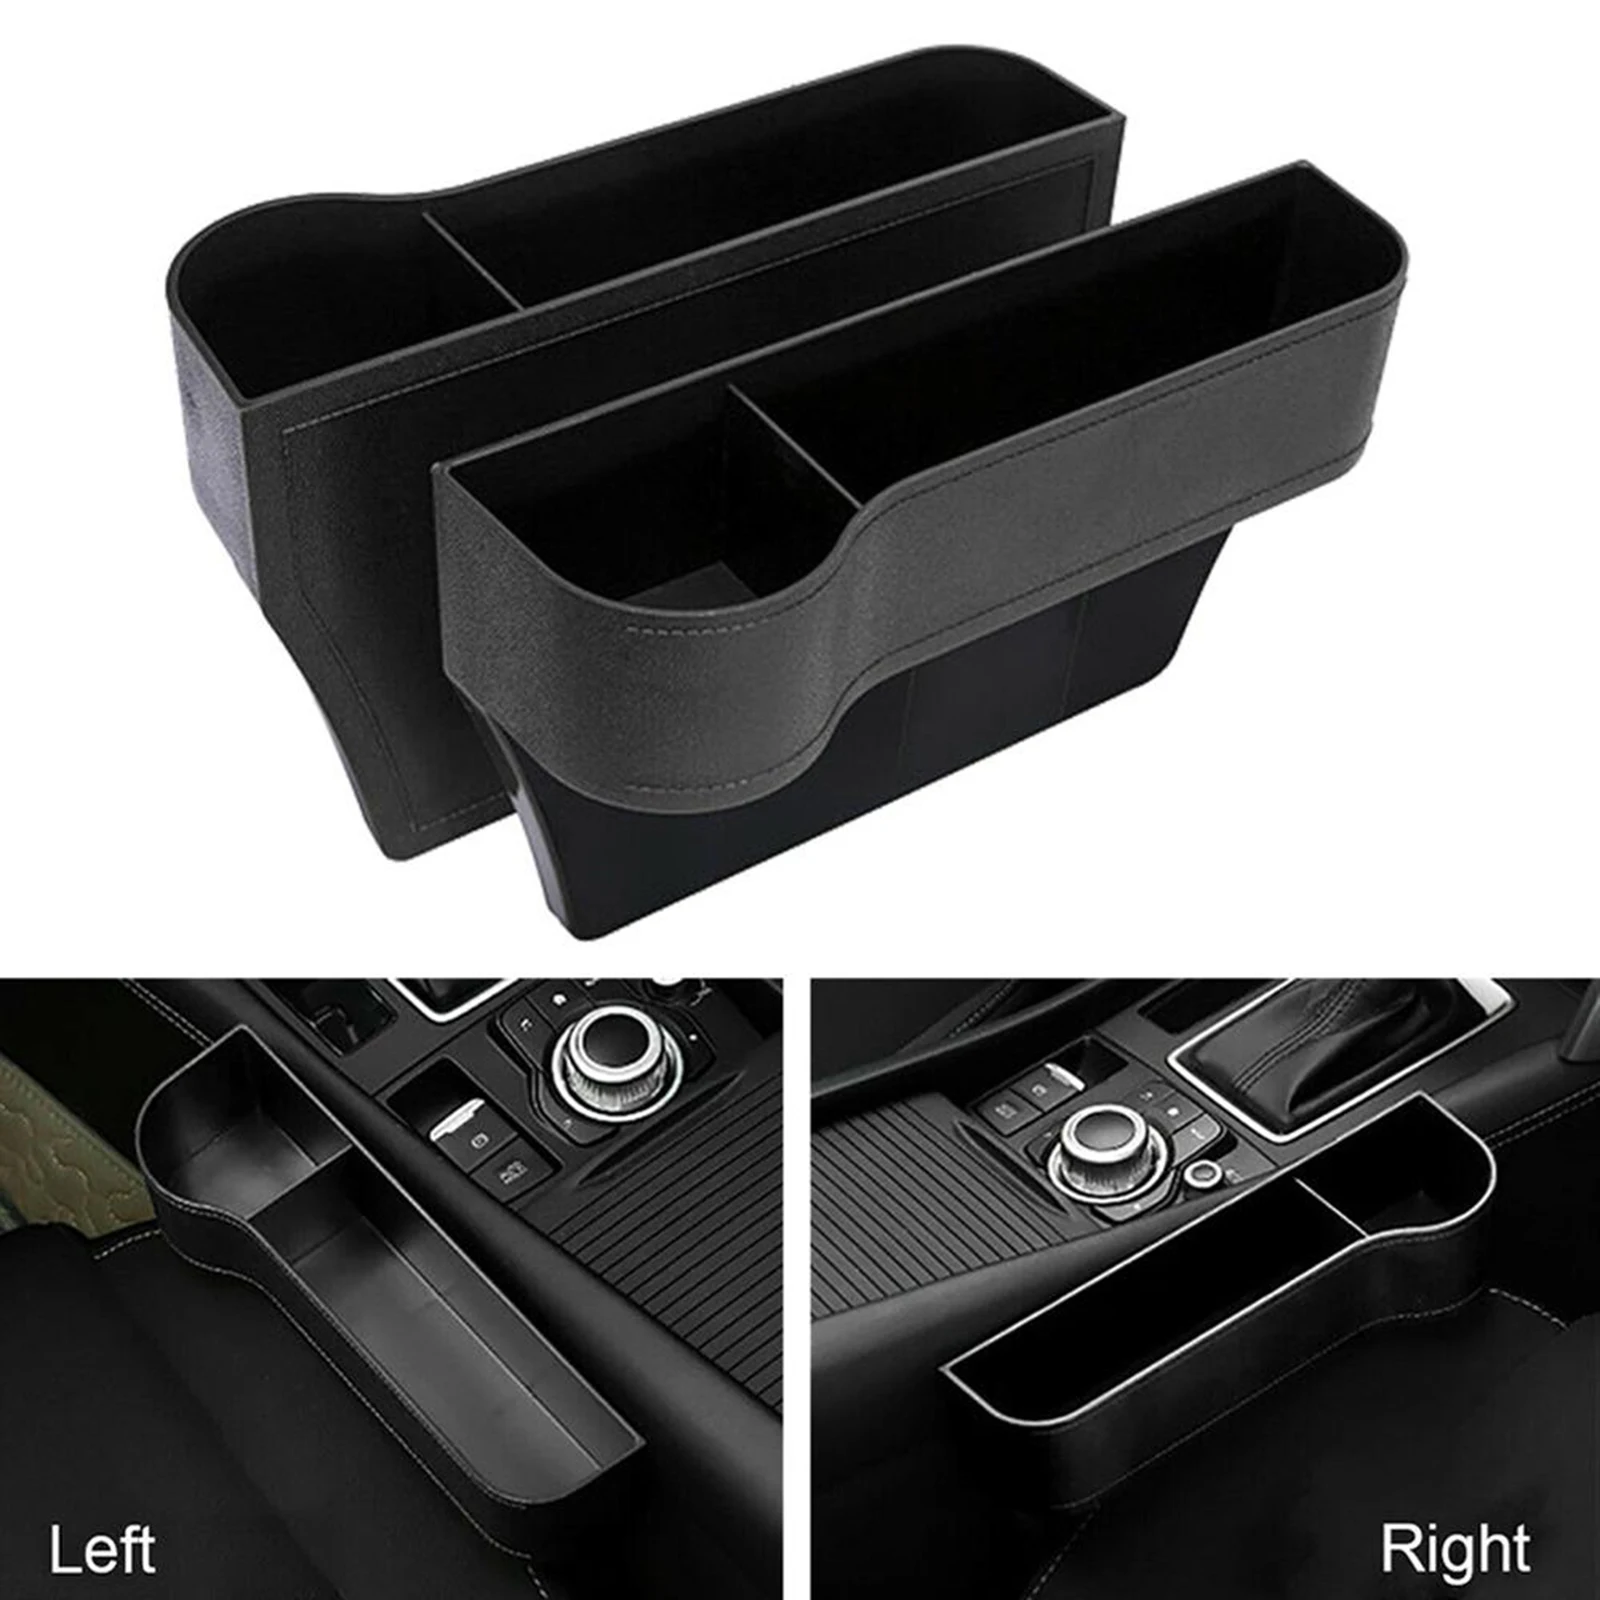 Car Side Front Seat Organizer, Mobile Phone Holder Storage, Console Gap Filler Pockets Catcher for Cellphone Wallet Coin Key